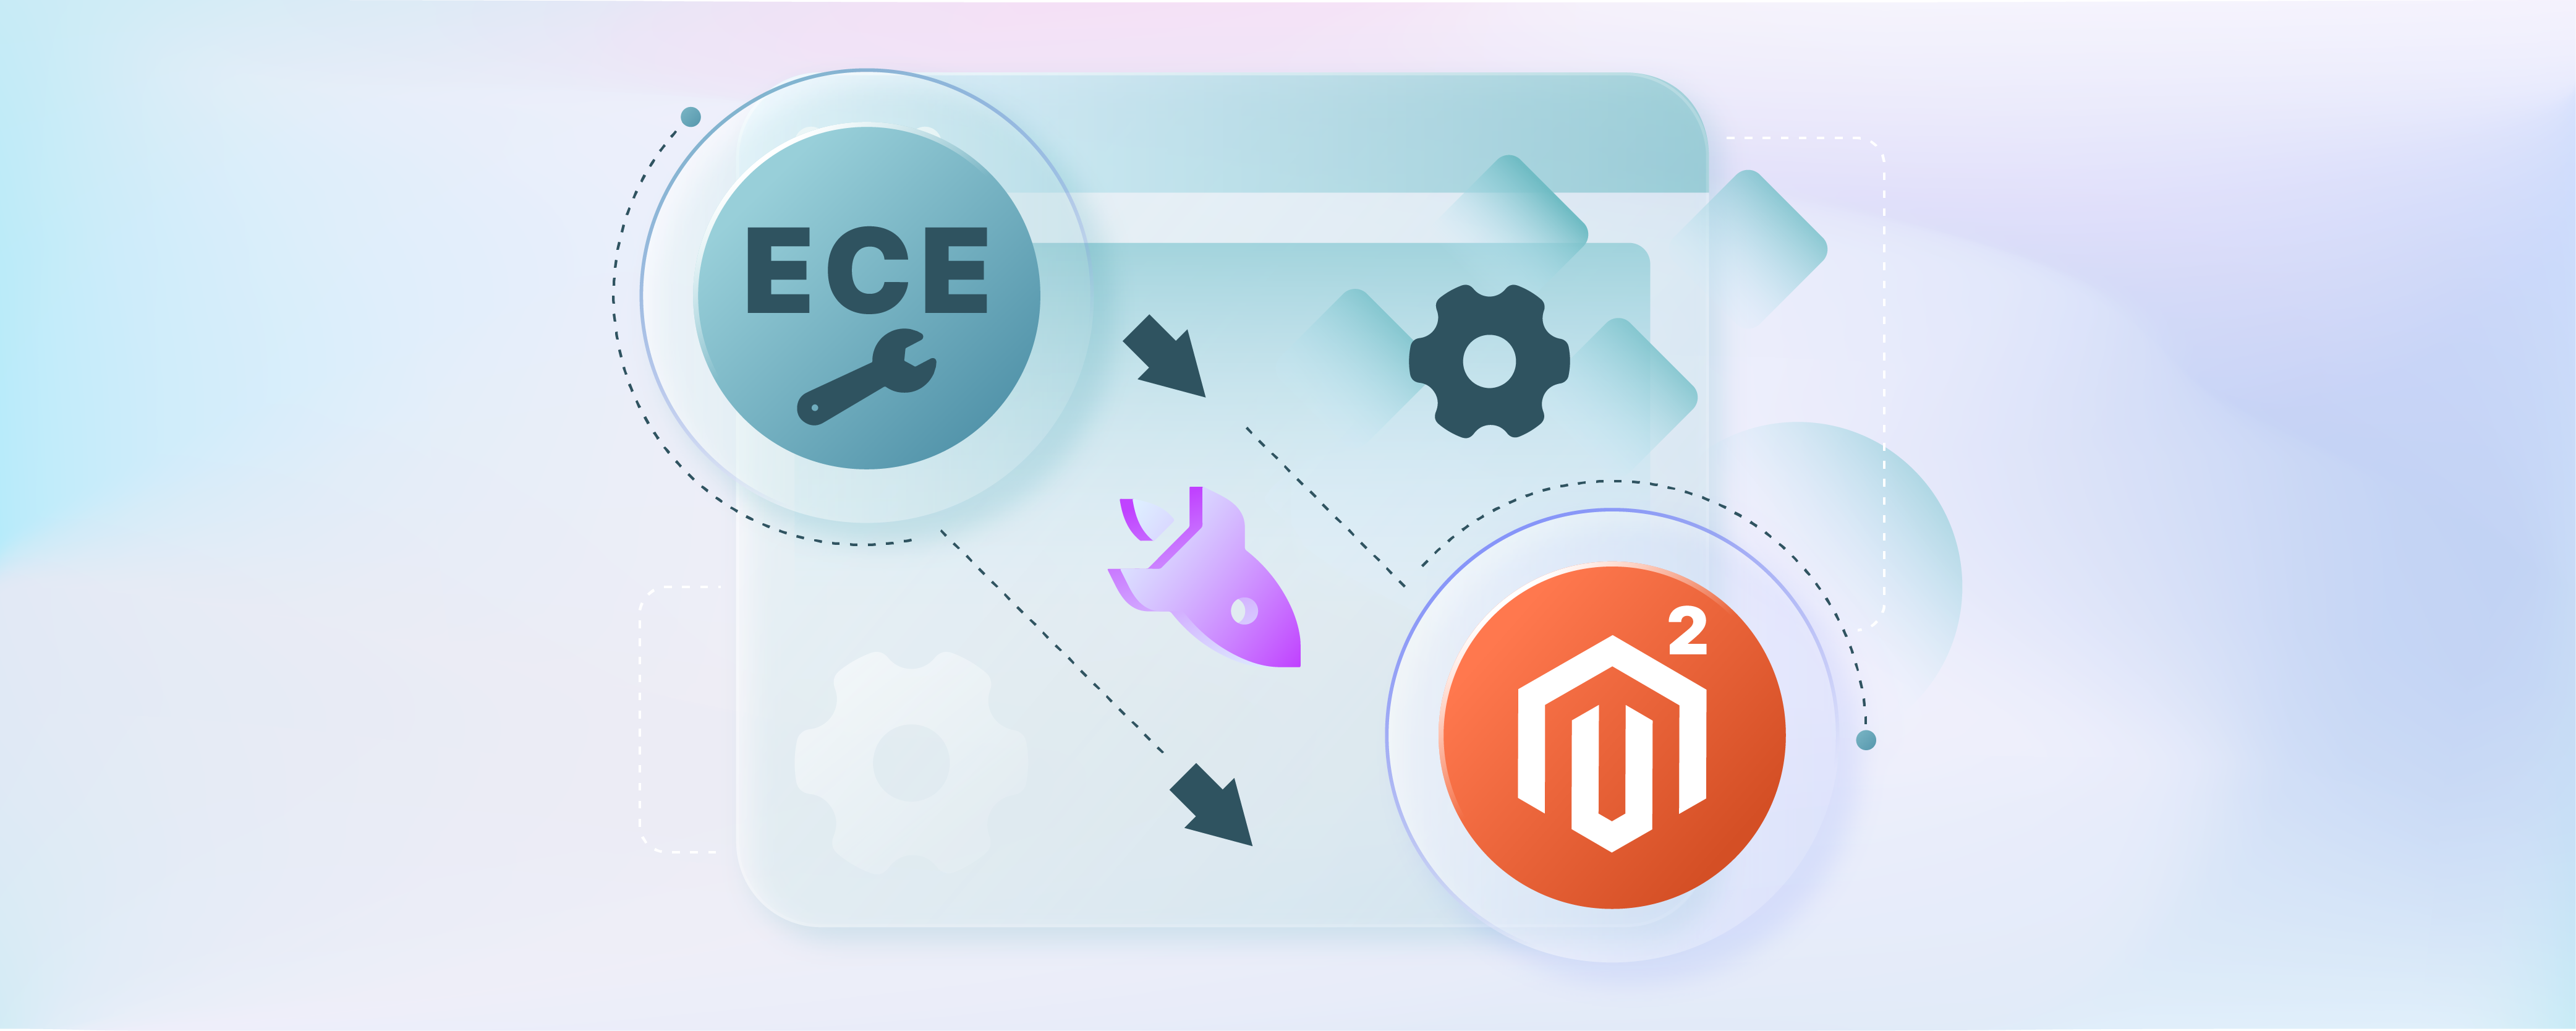 ECE tools Magento 2: How to deploy the package?